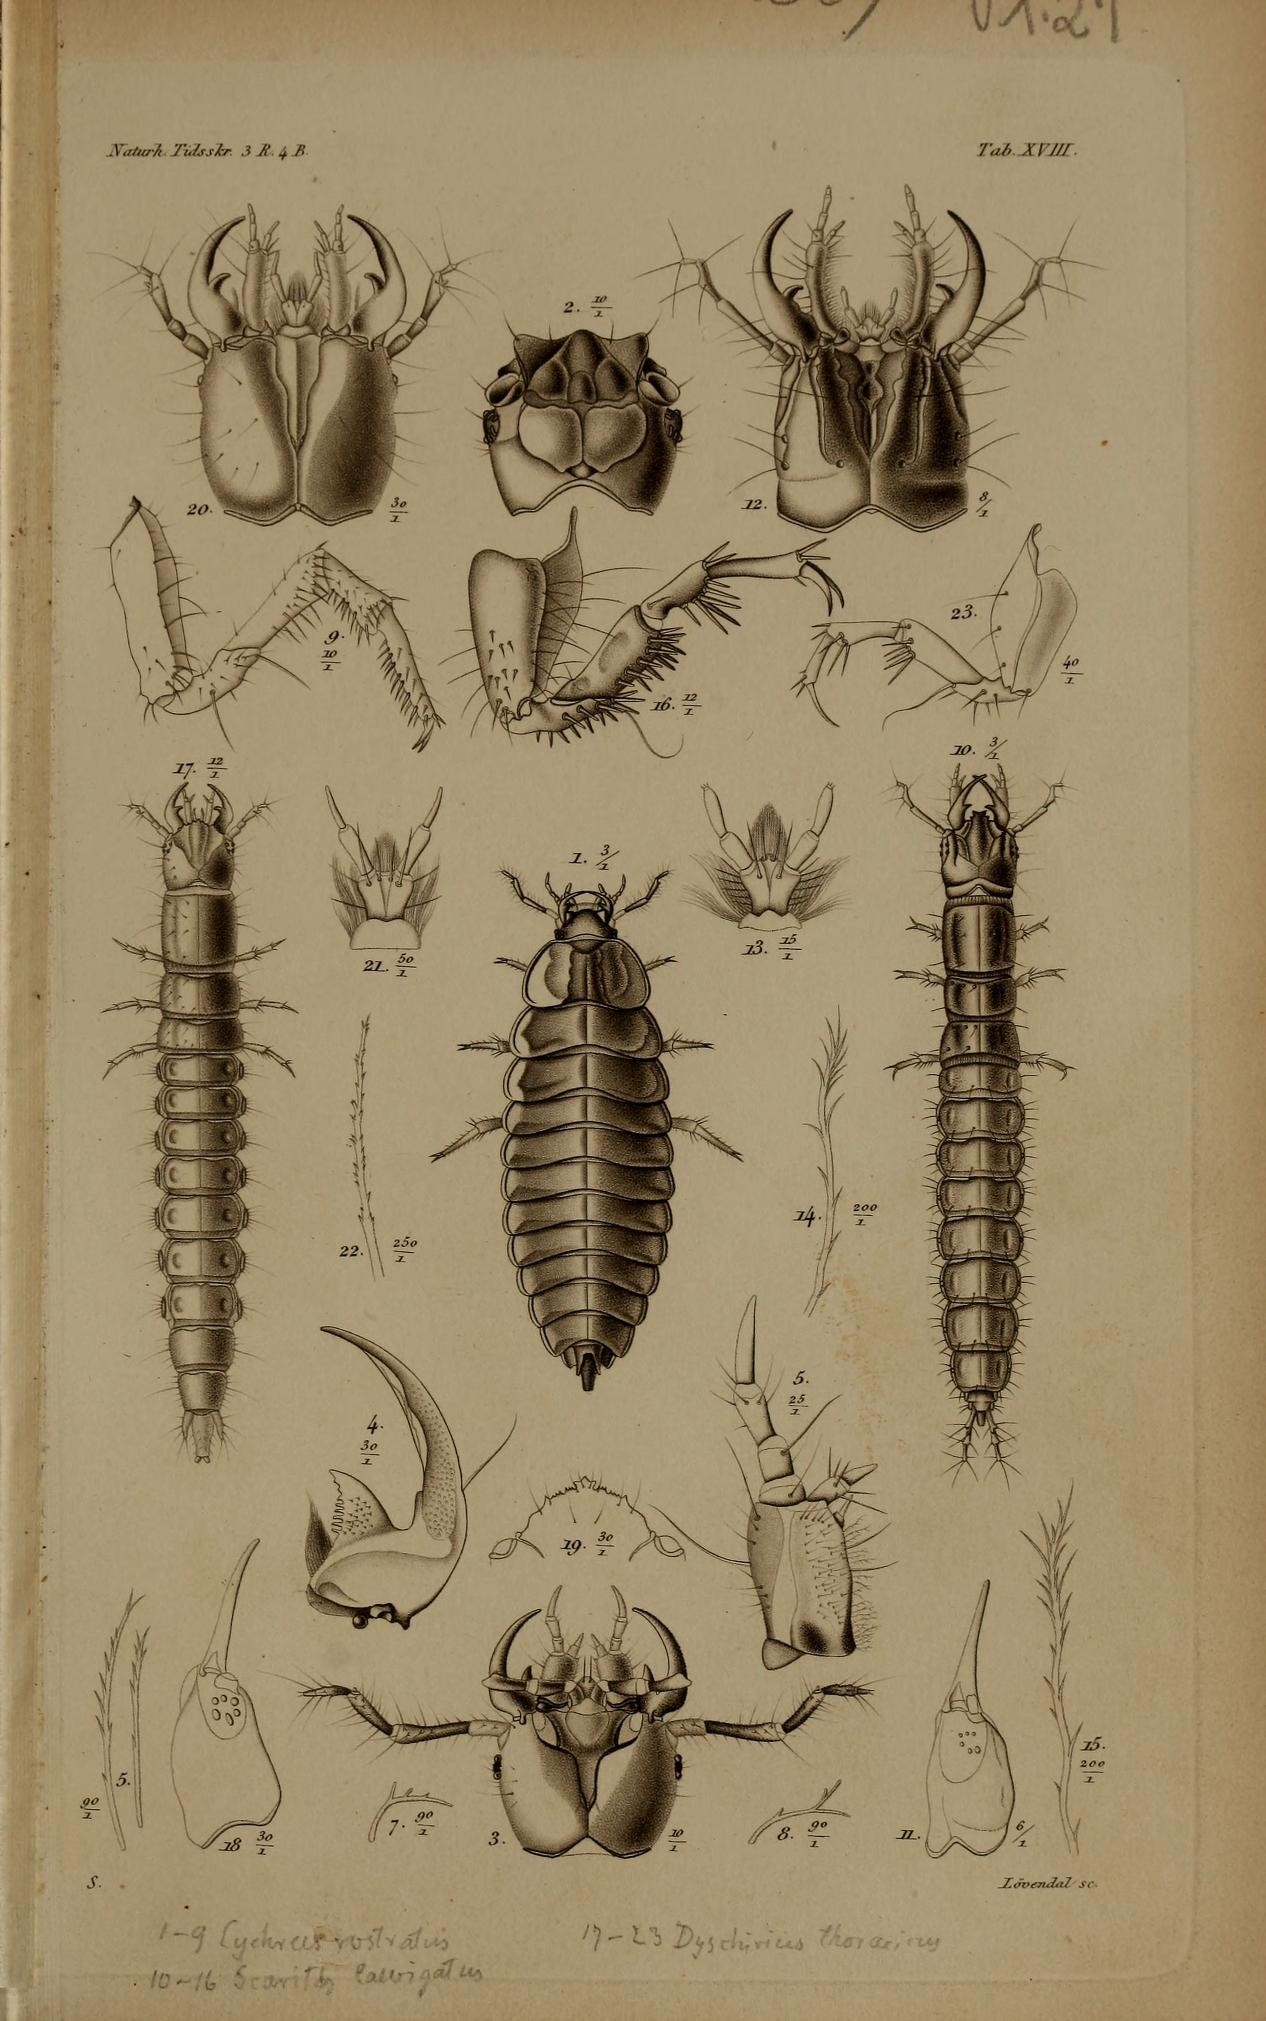 an illustration shows different insect species and their different forms